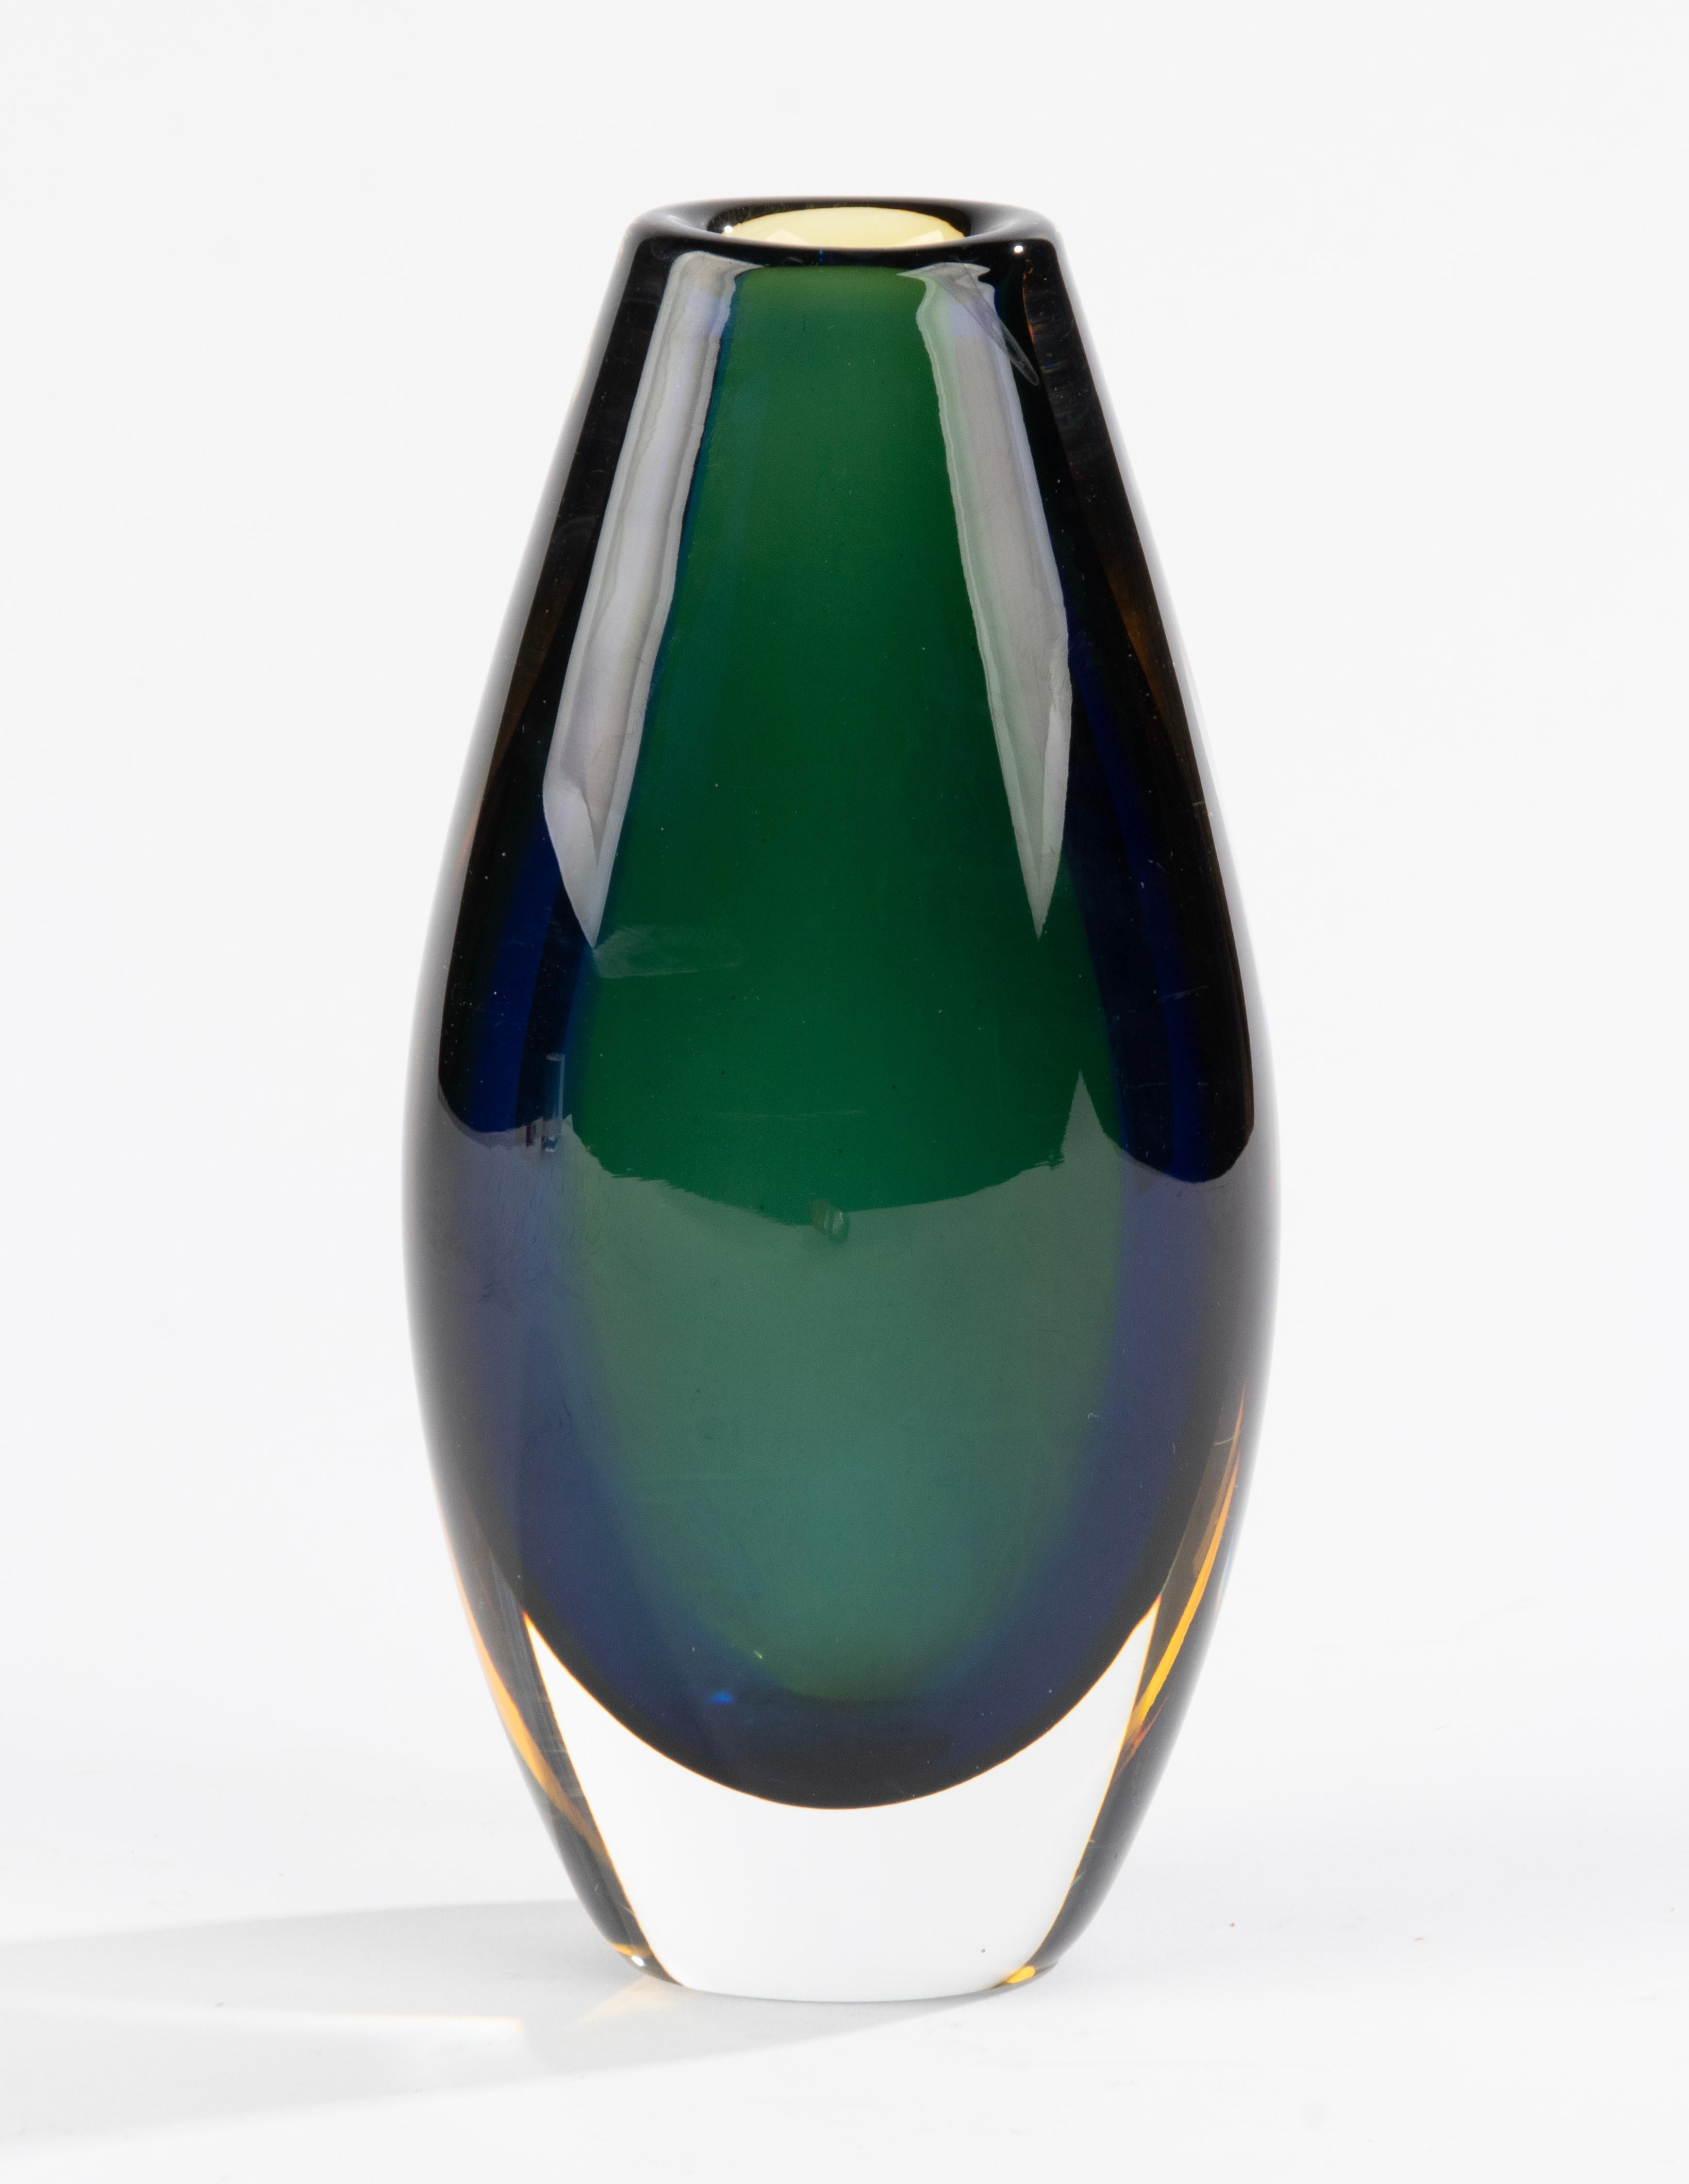 Mid Century Modern Art Glass Vase by Kosta Boda - Designed by Vicke Lindstrand  In Good Condition For Sale In Casteren, Noord-Brabant